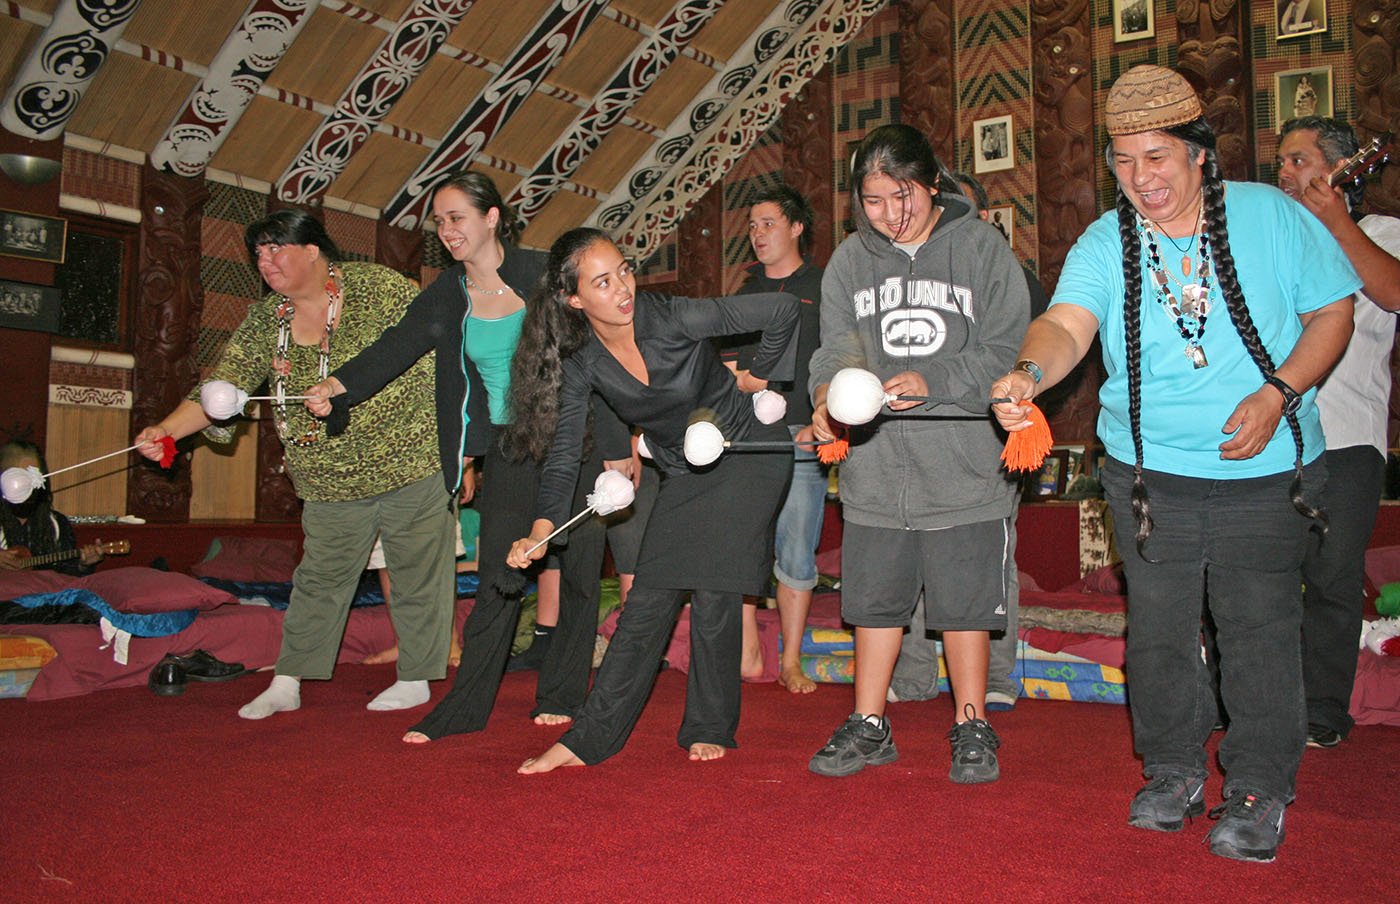  Chief Caleen Sisk and other Winnemem Wintu dance with the Maori in New Zealand. 2010. Photo: Courtesy of Will Doolittle 